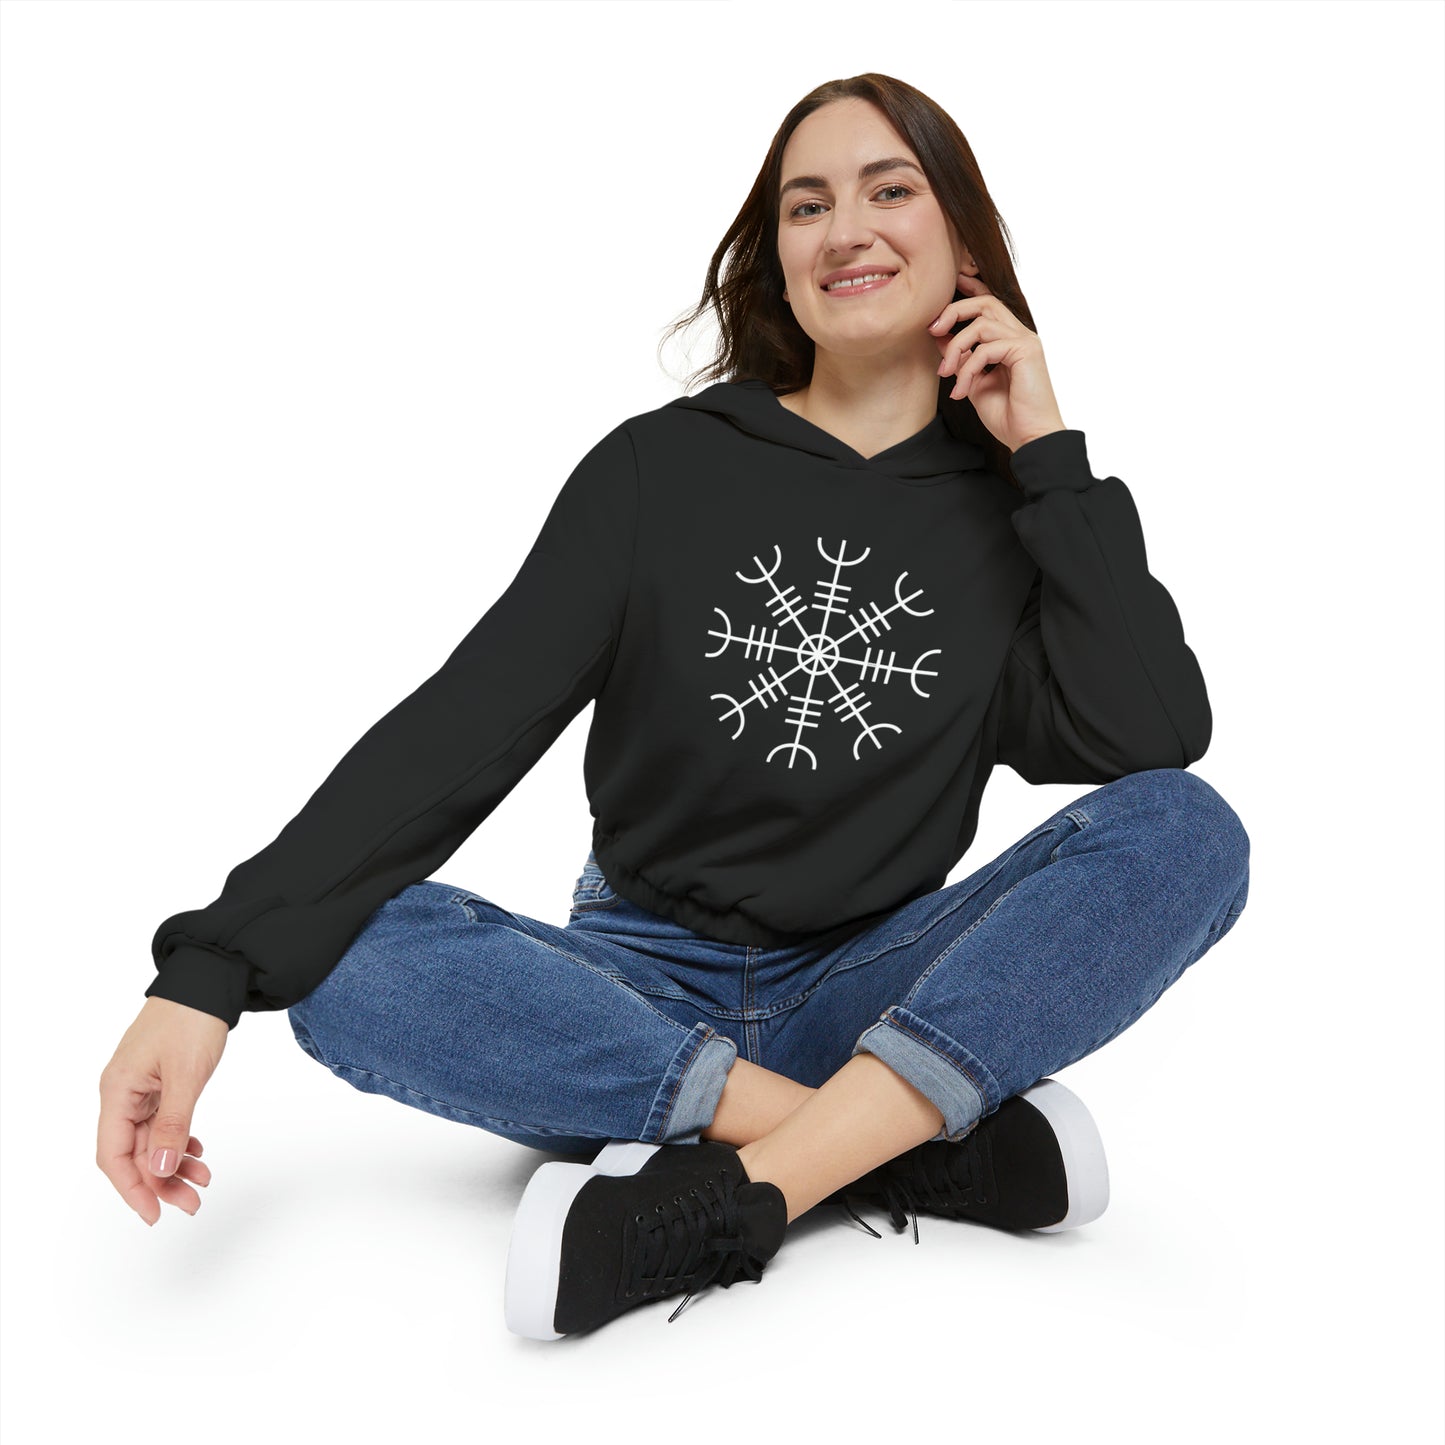 Spellcaster by Patti Negri "Protection"Women's Cinched Bottom Hoodie